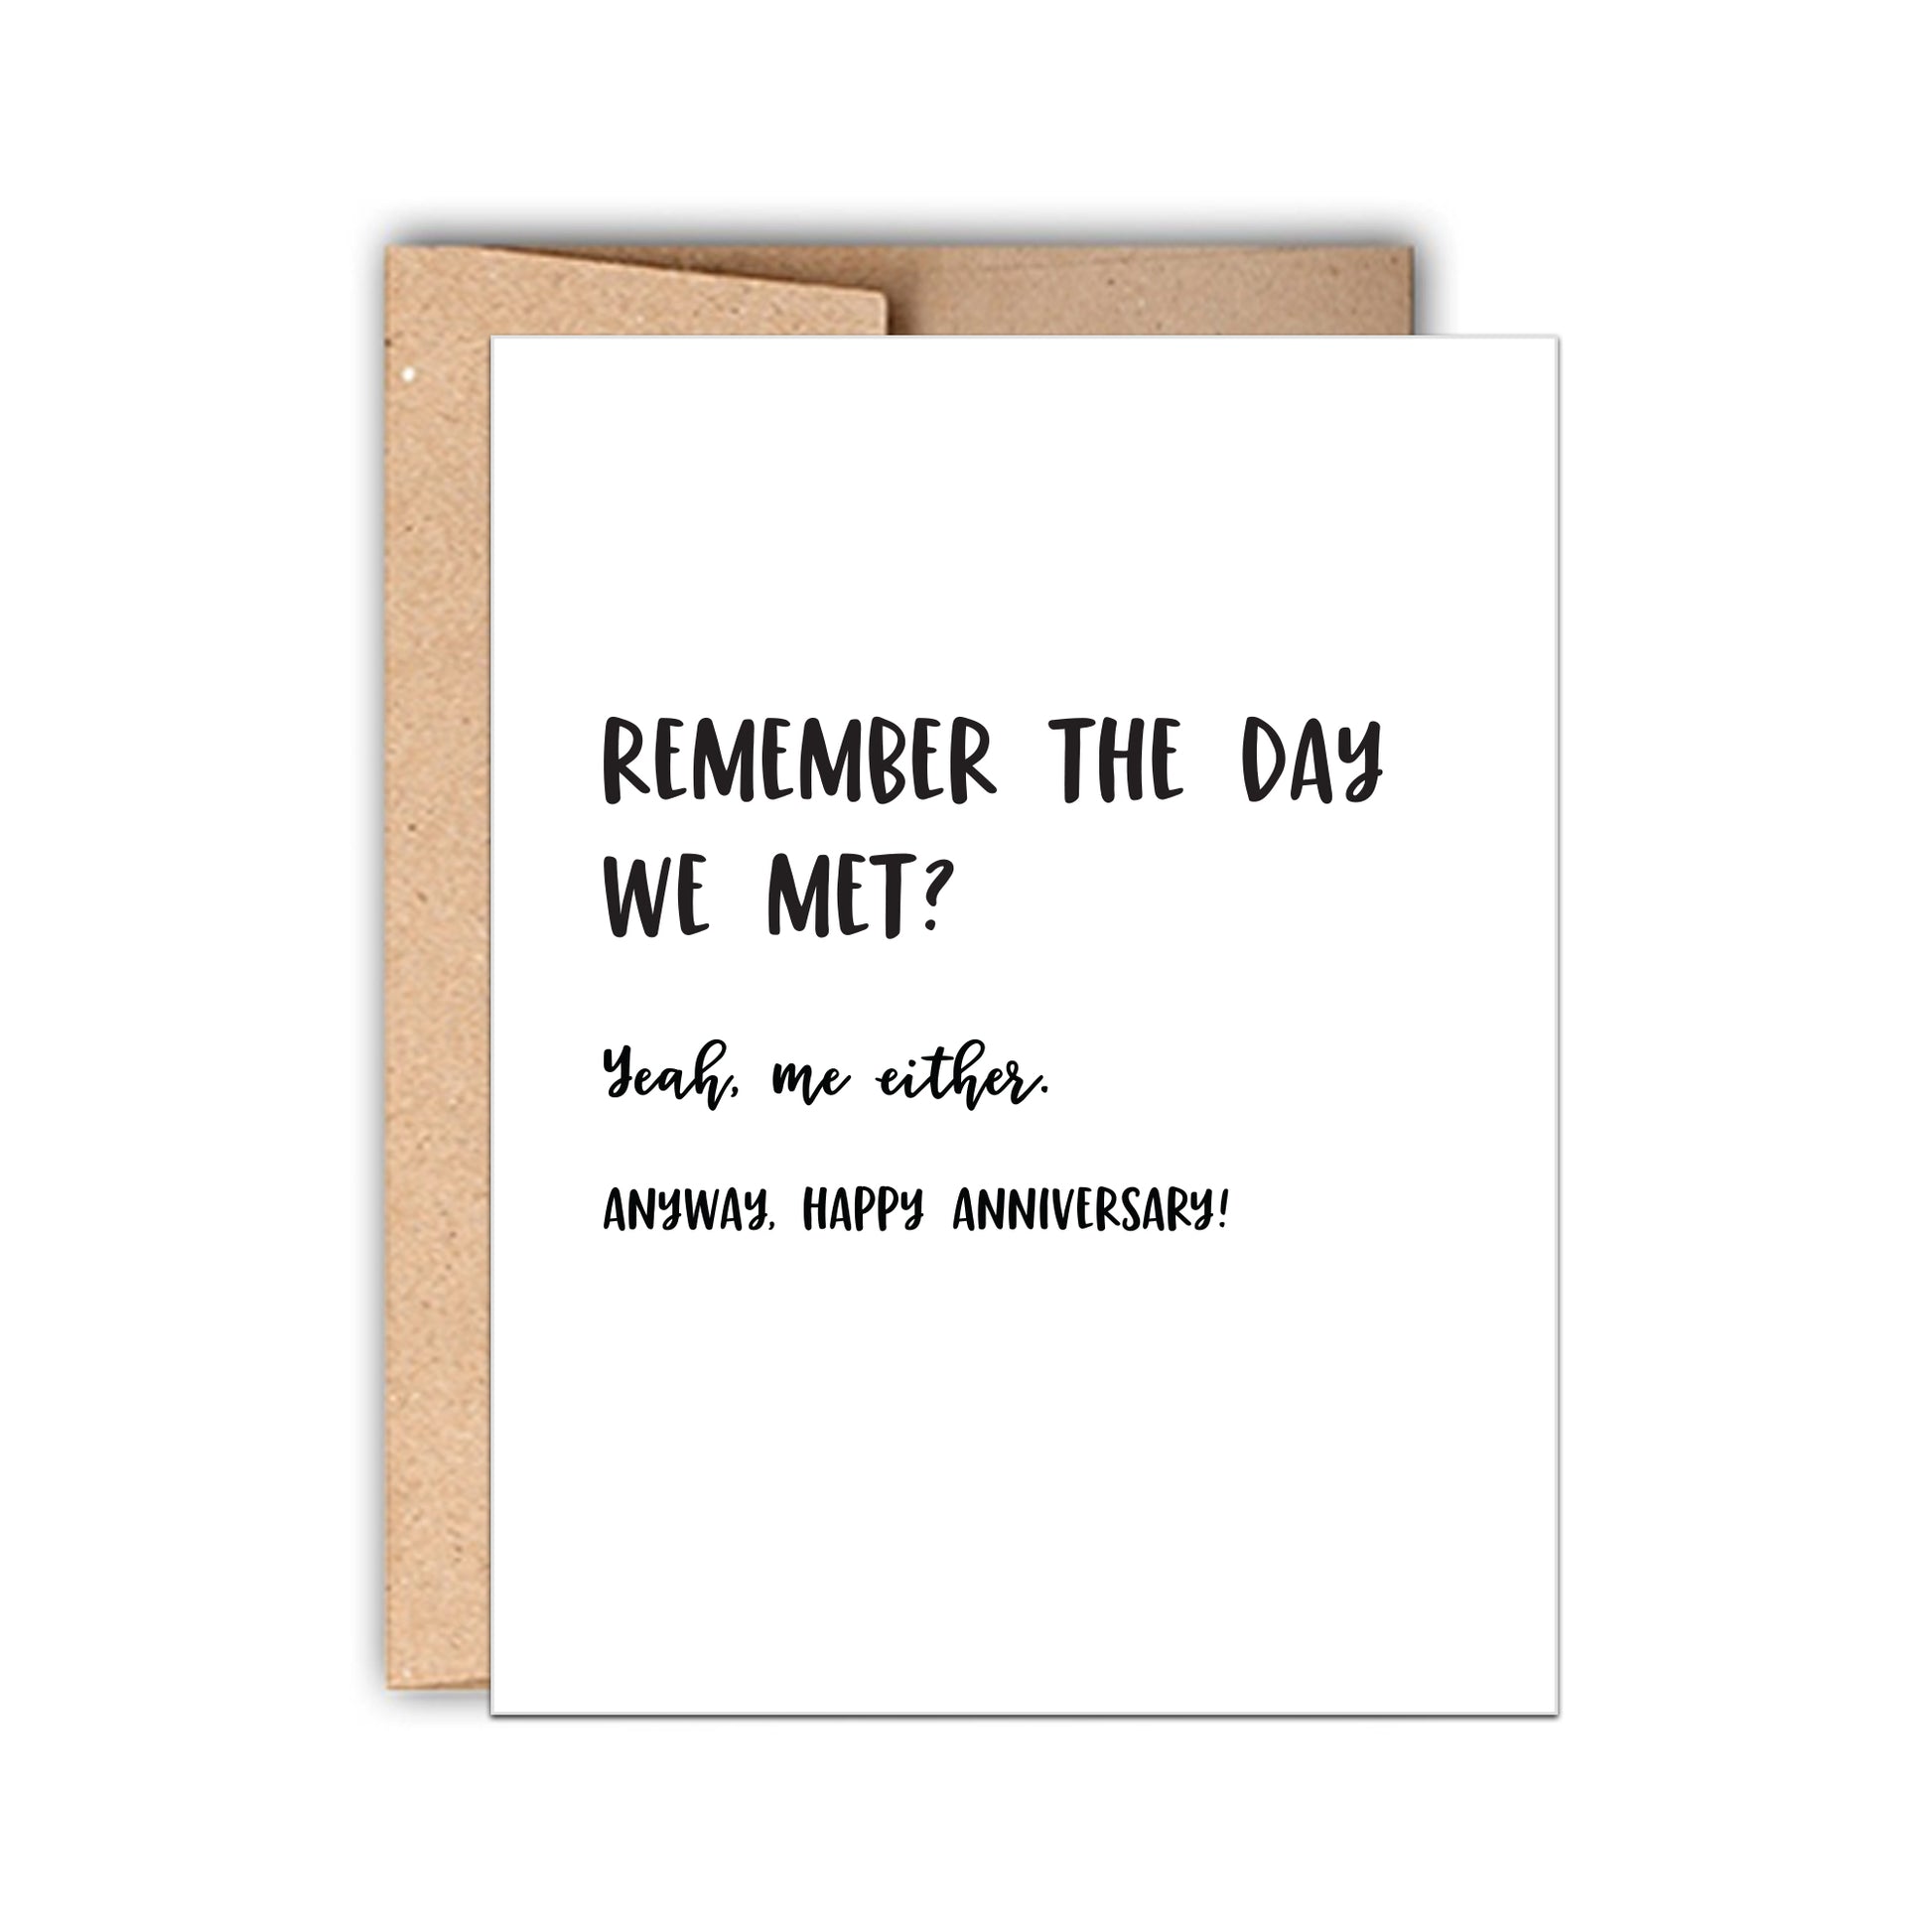 remember the day we met? funny anniversary card